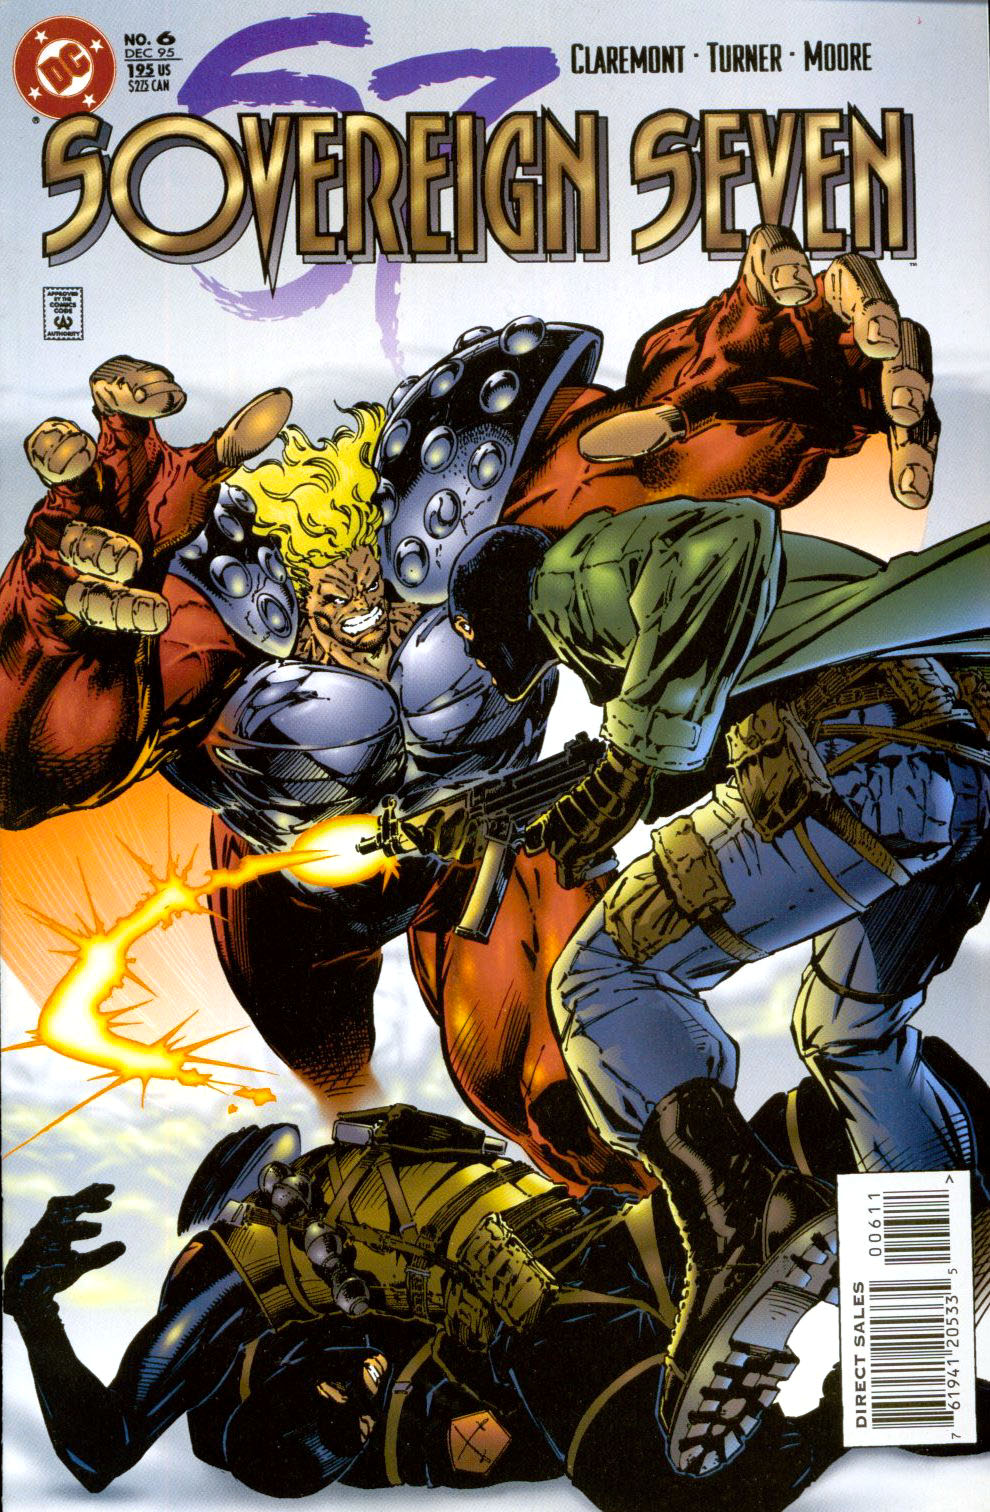 Read online Sovereign Seven comic -  Issue #6 - 1